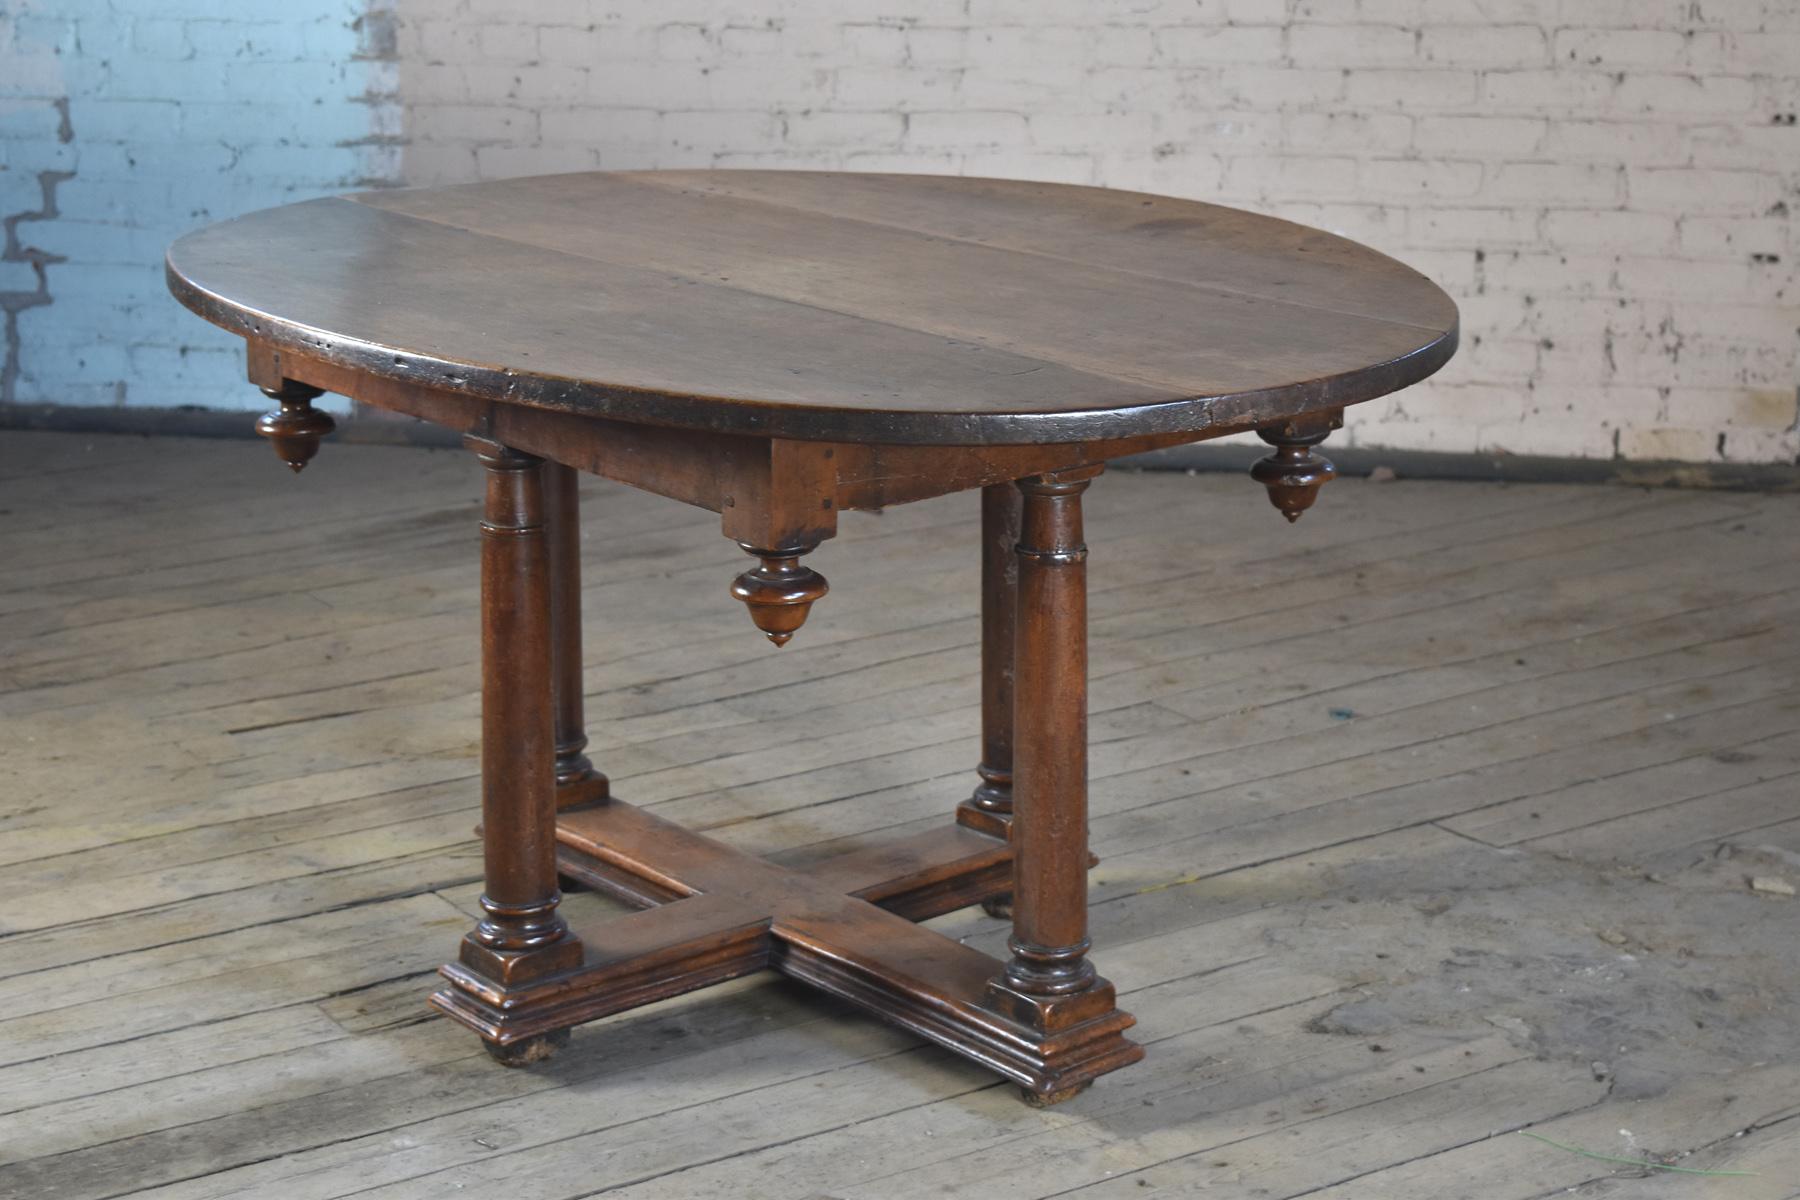 French Henry IV oval center, dining or breakfast table, early 17th century, of rare form and conceptual design, solid walnut with wonderful, deep patina.
The oval top, consisting of three boards, over a rectangular frieze adorned with drop-finials